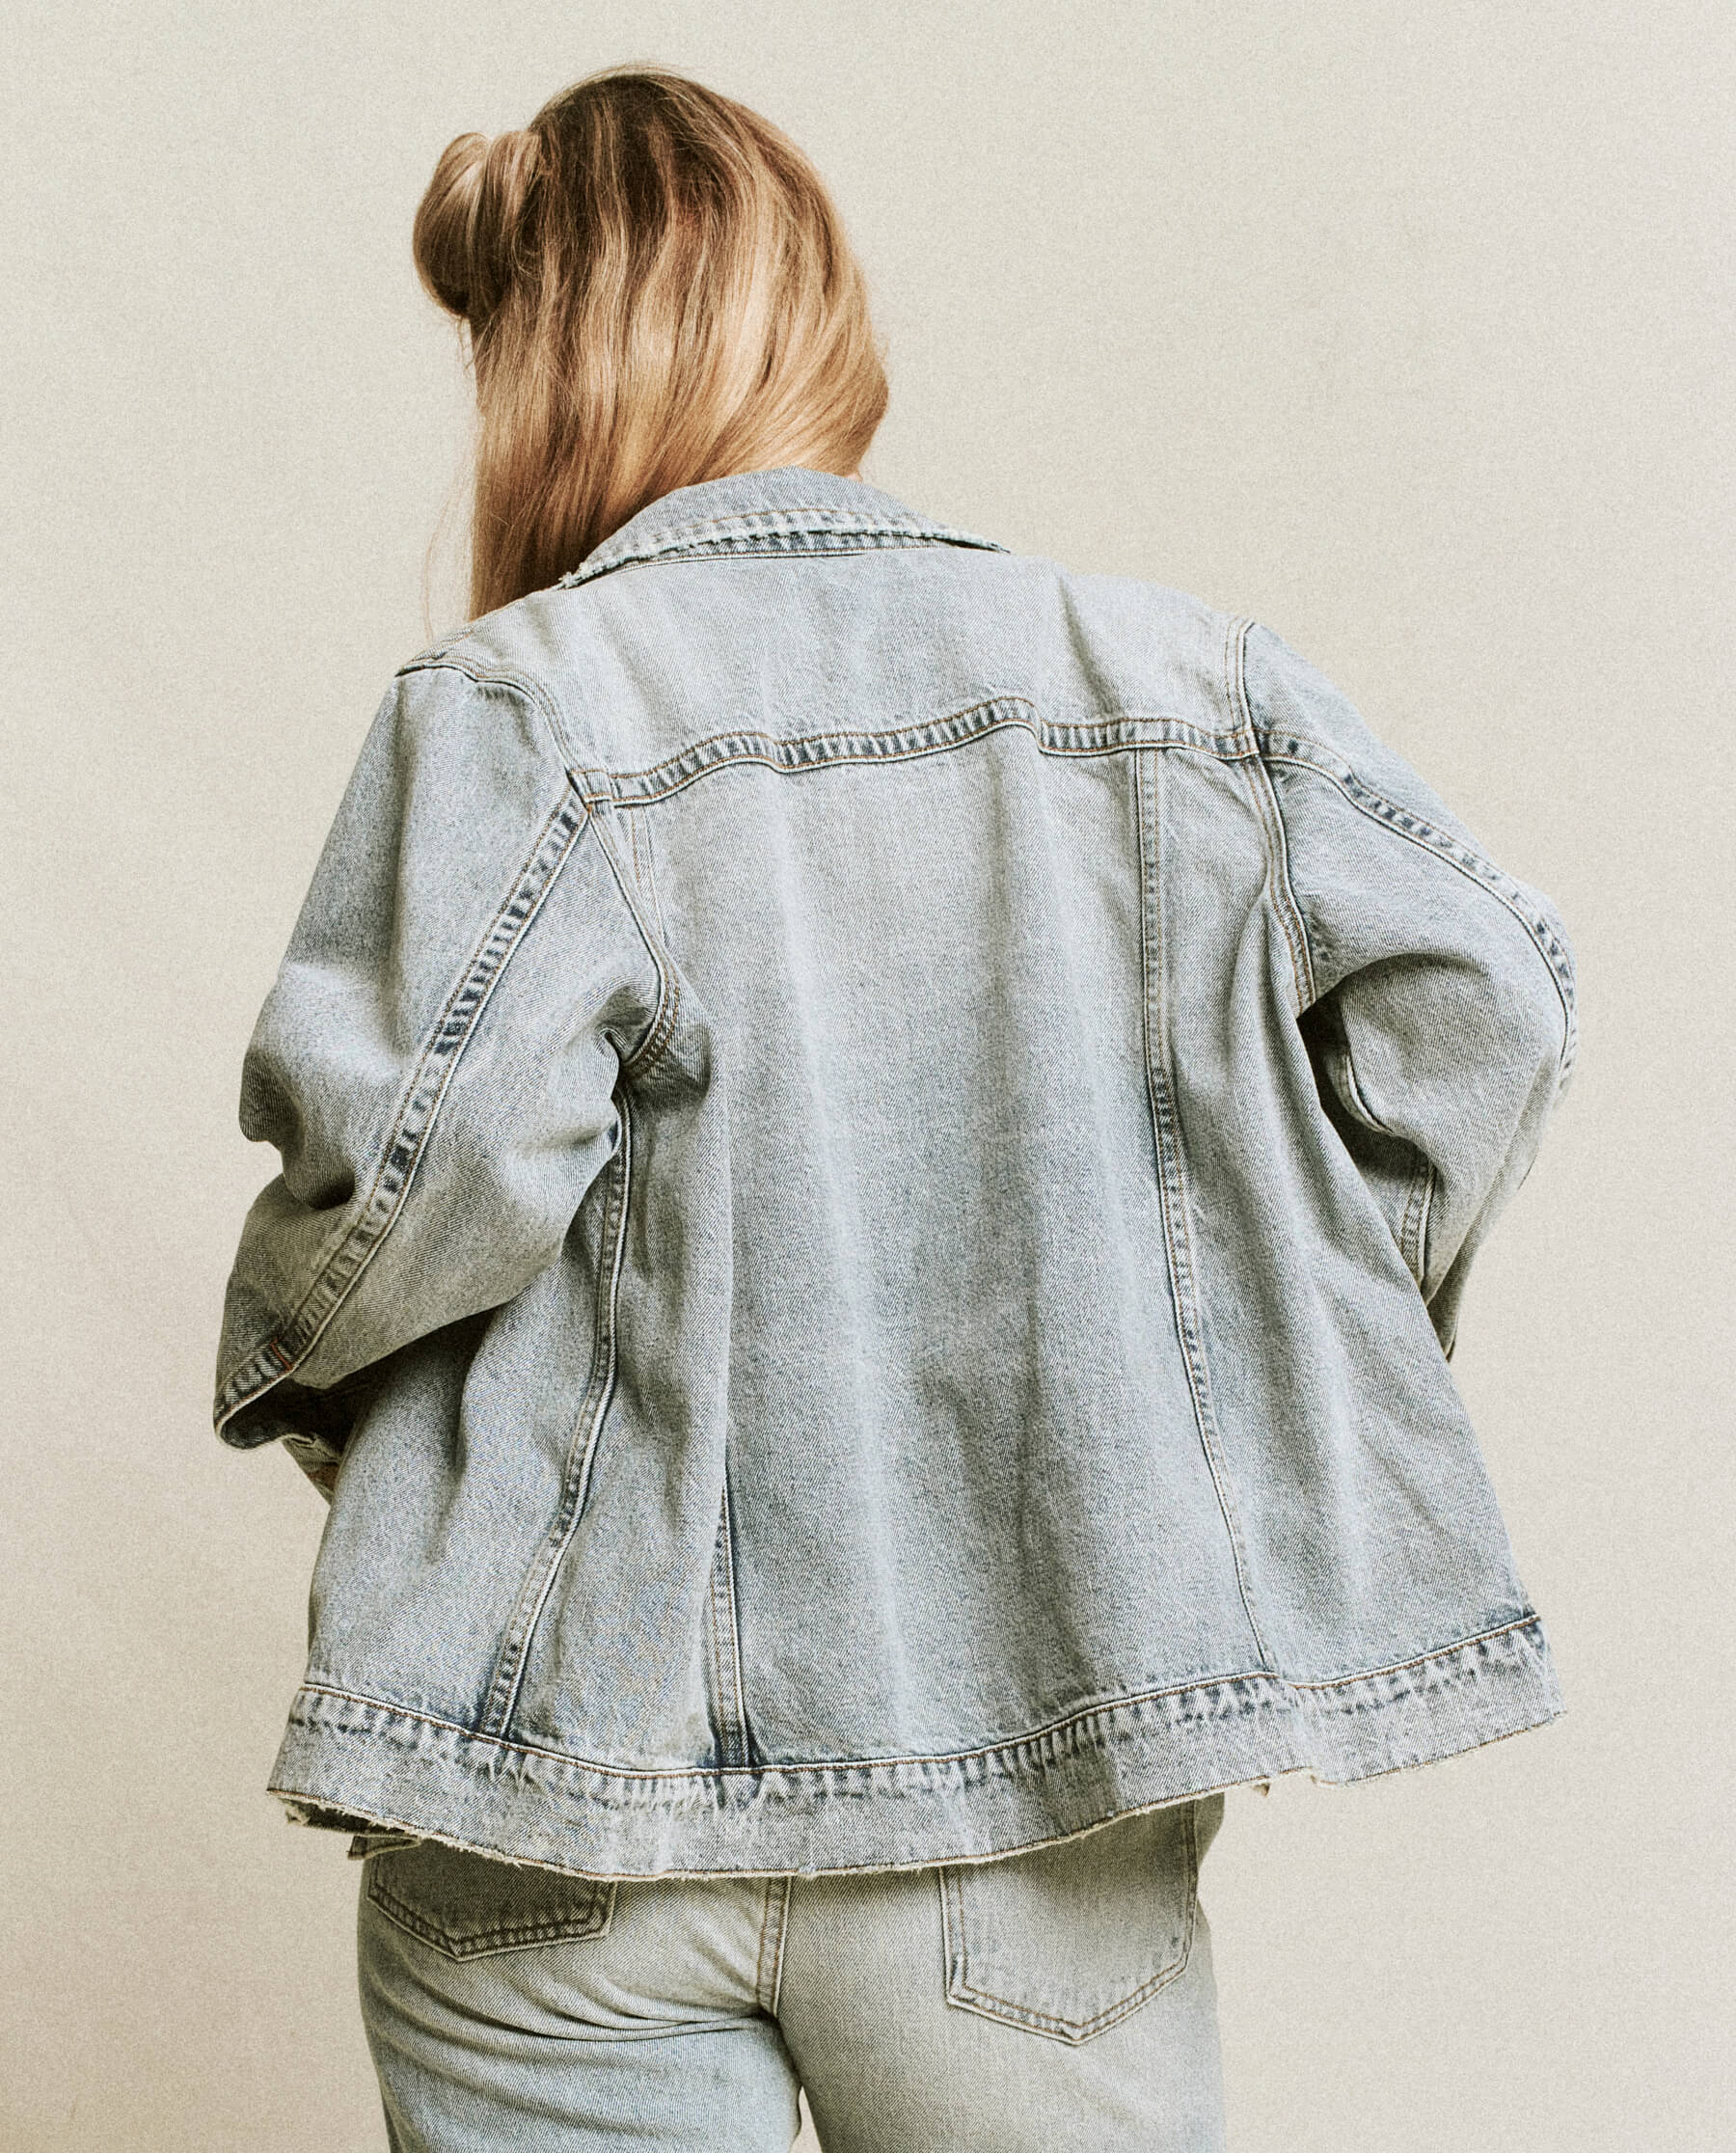 THE SLOUCHY JEAN JACKET - DERBY WASH